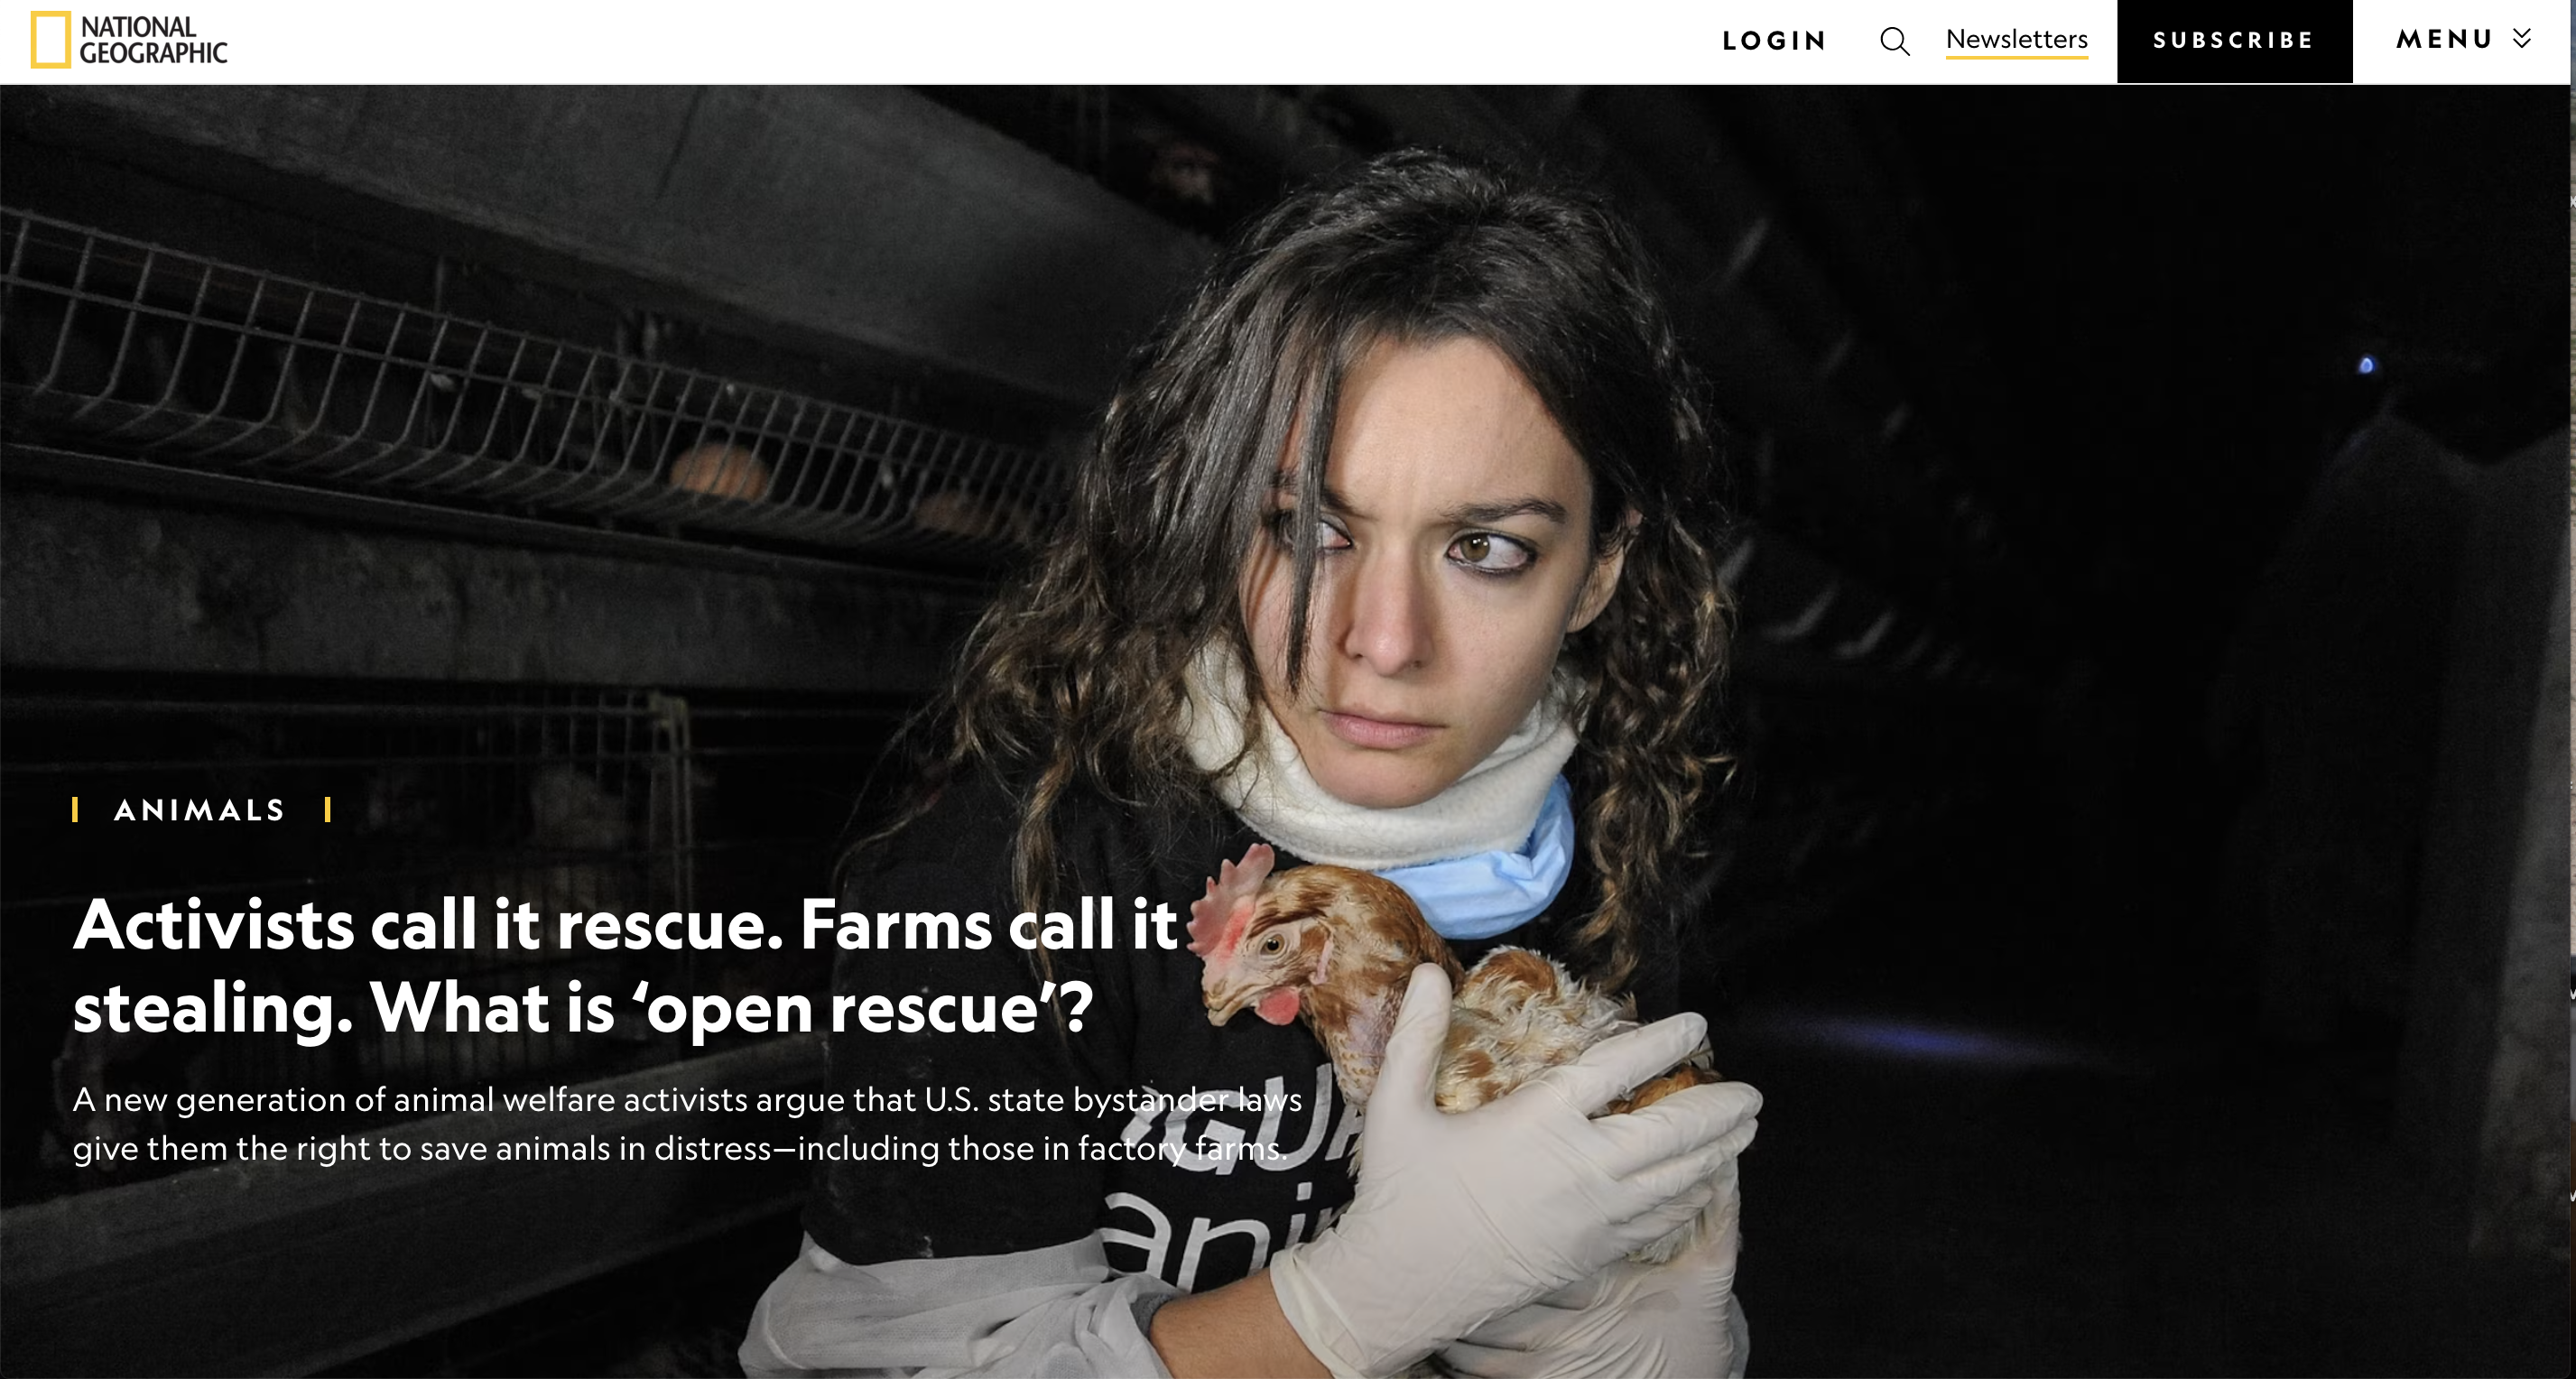 National Geographic - What is ‘open rescue’?